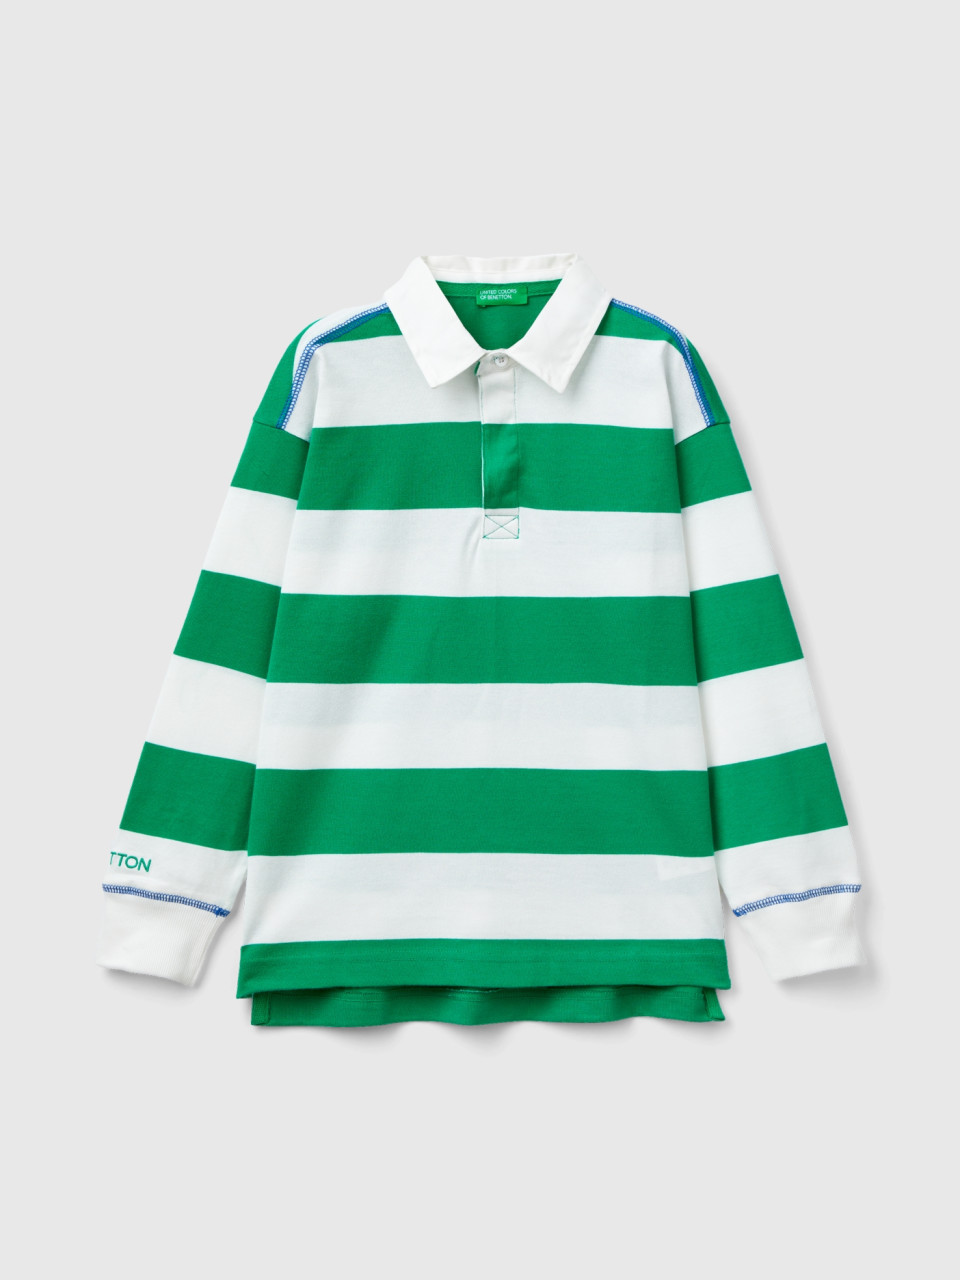 Benetton, Rugby Polo With Green And White Stripes, Multi-color, Kids